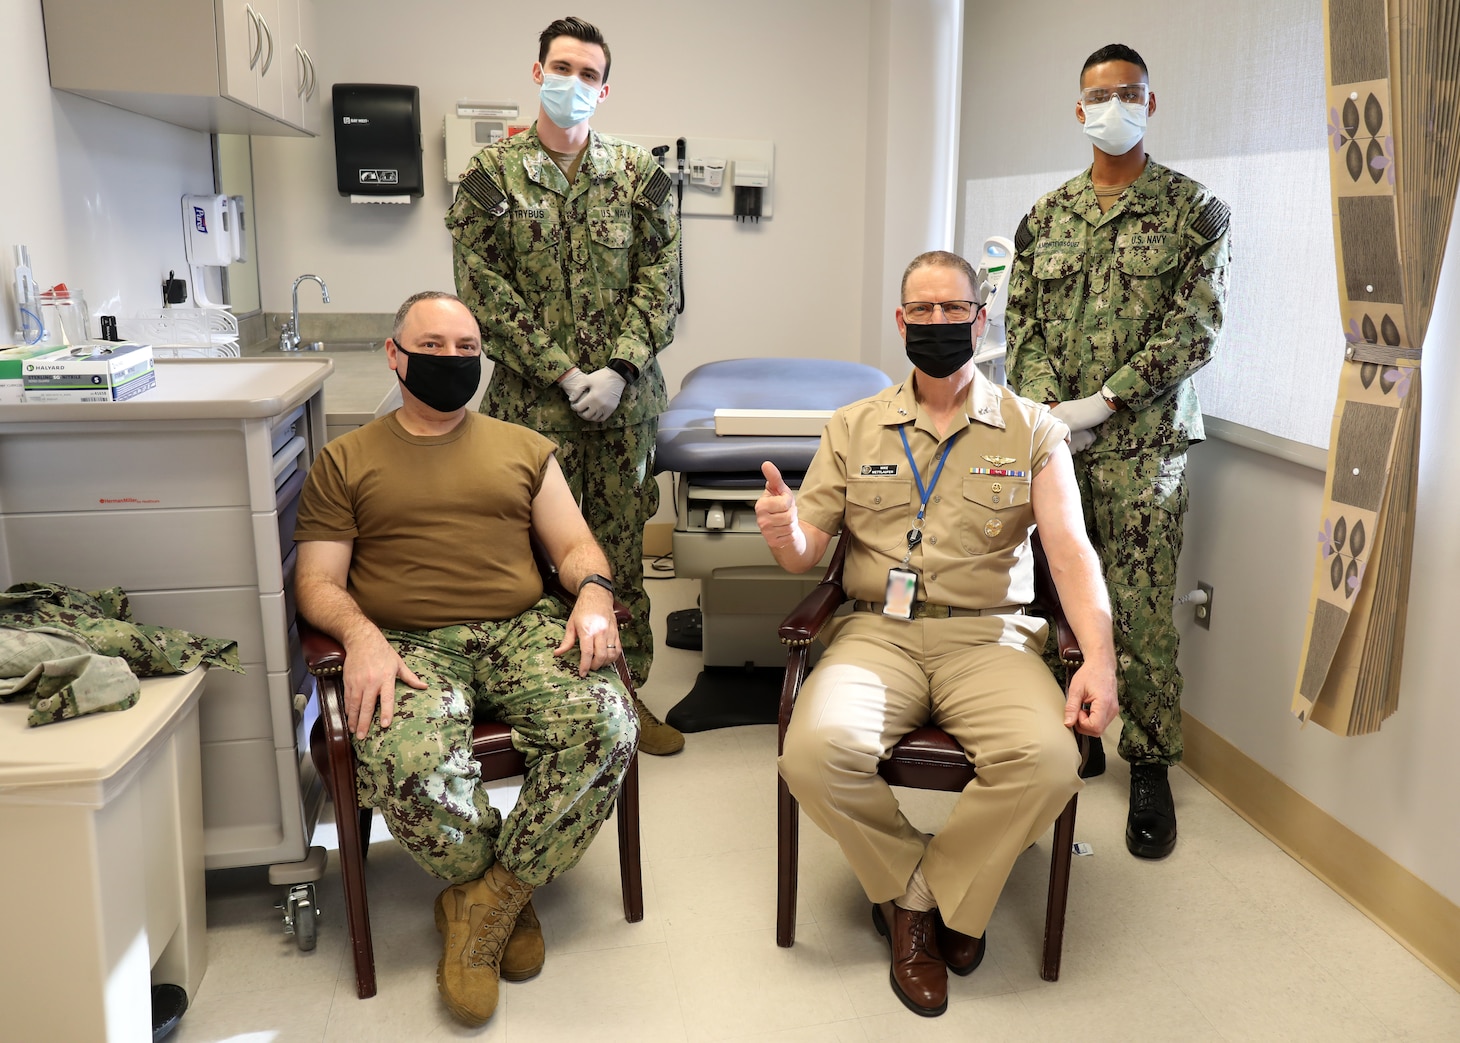 Rear Adm. Michael Wettlaufer, Commander, Military Sealift Command (right) and Command Master Chief Theron Fisher, Military Sealift Command's Command Master Chief (left), pose for a photograph  with U.S. Navy medical personnel after receiving their first dose of the COVID-19 vaccination at the Sewell's Point Branch Medical Clinic in Norfolk, Va., Jan. 4, 2021.